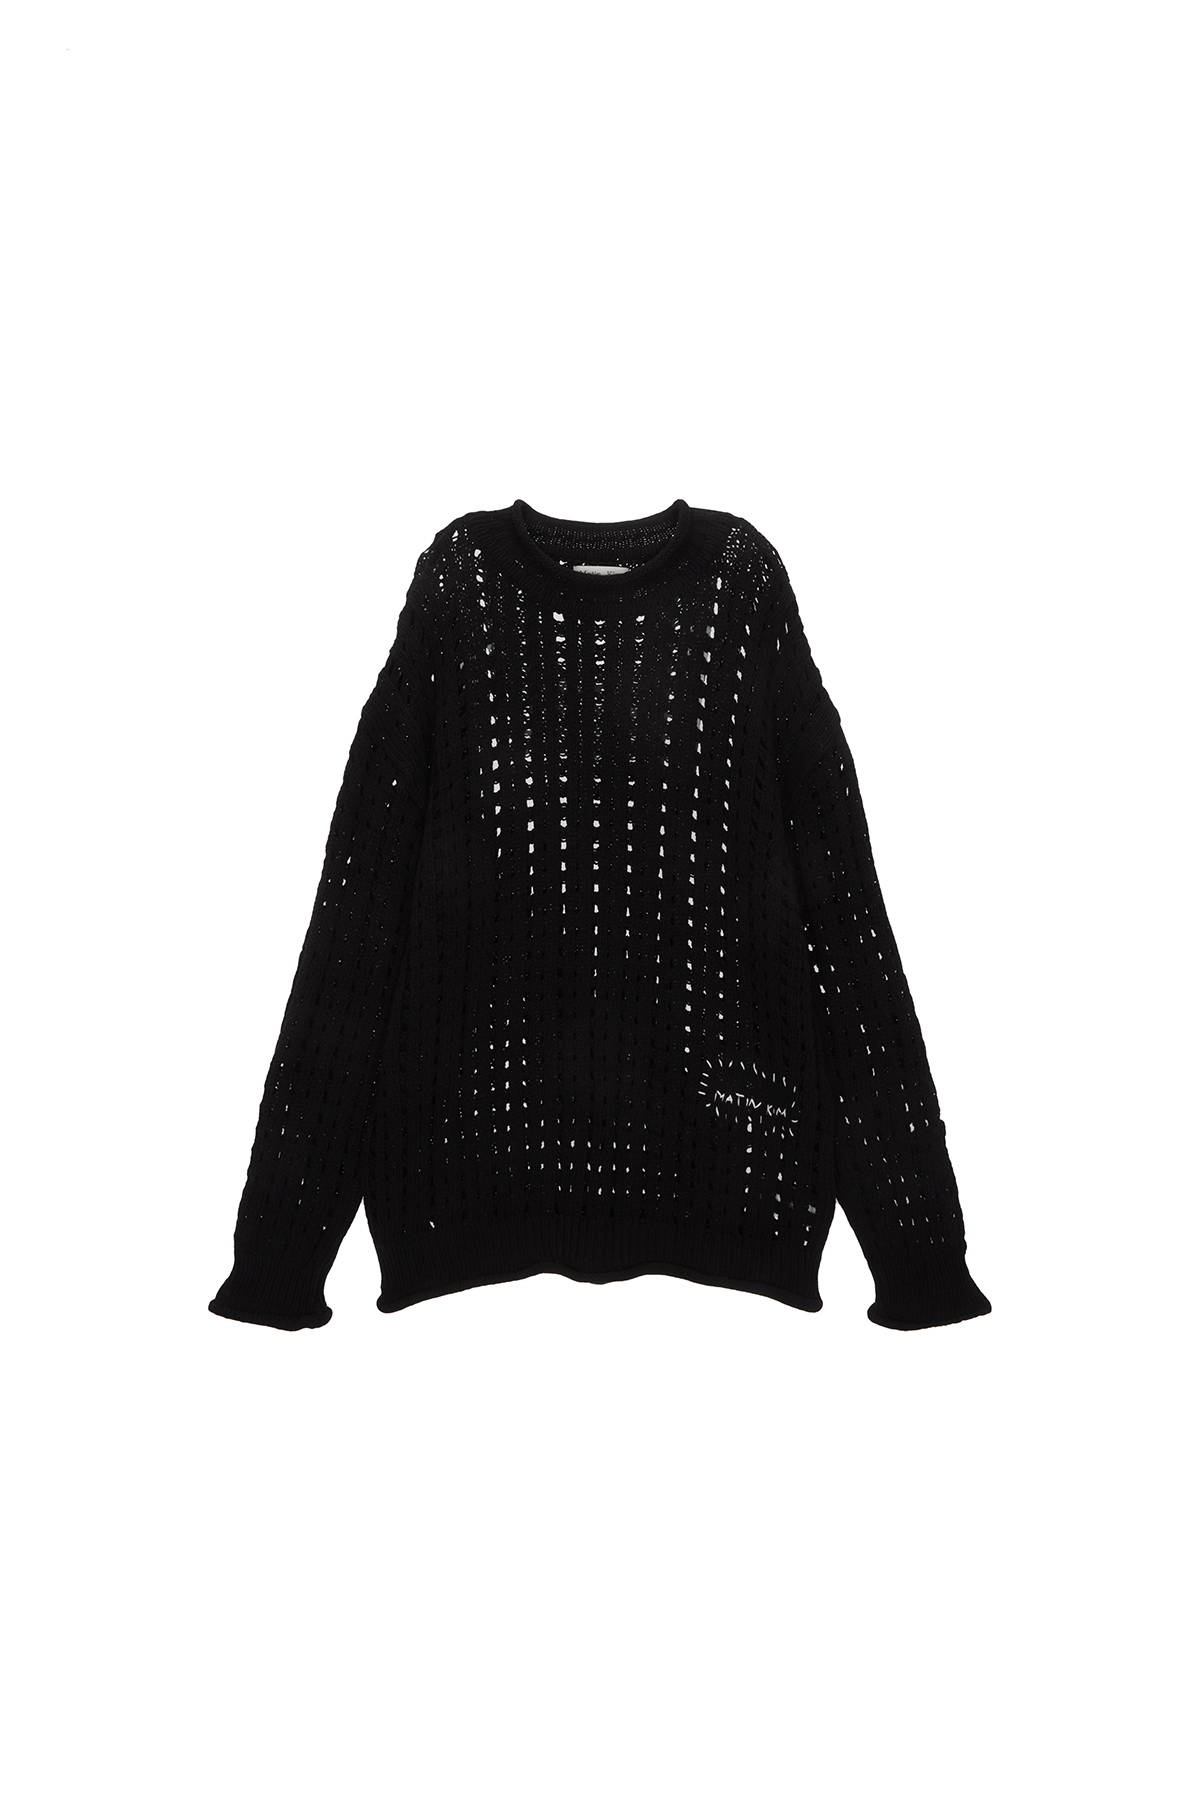 HAND KNITTED CROCHET PULLOVER IN BLACK